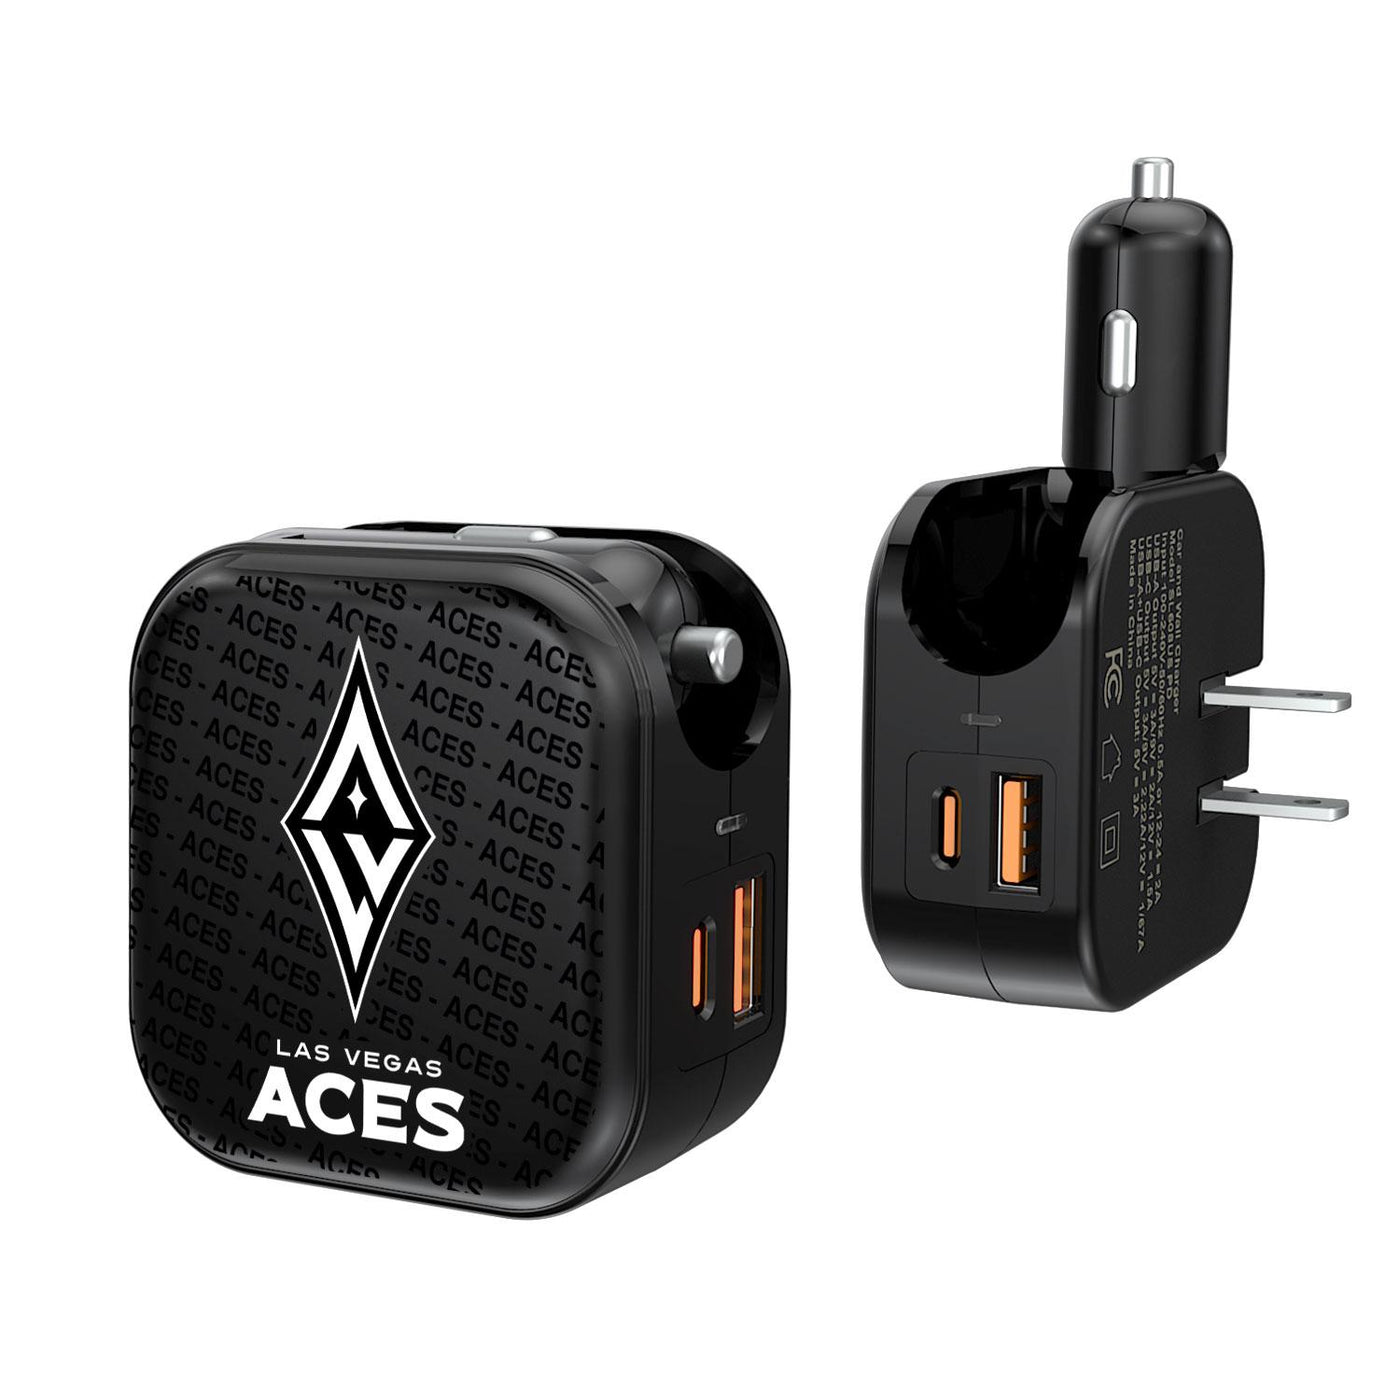 Las Vegas Aces 2-in-1 USB Charger